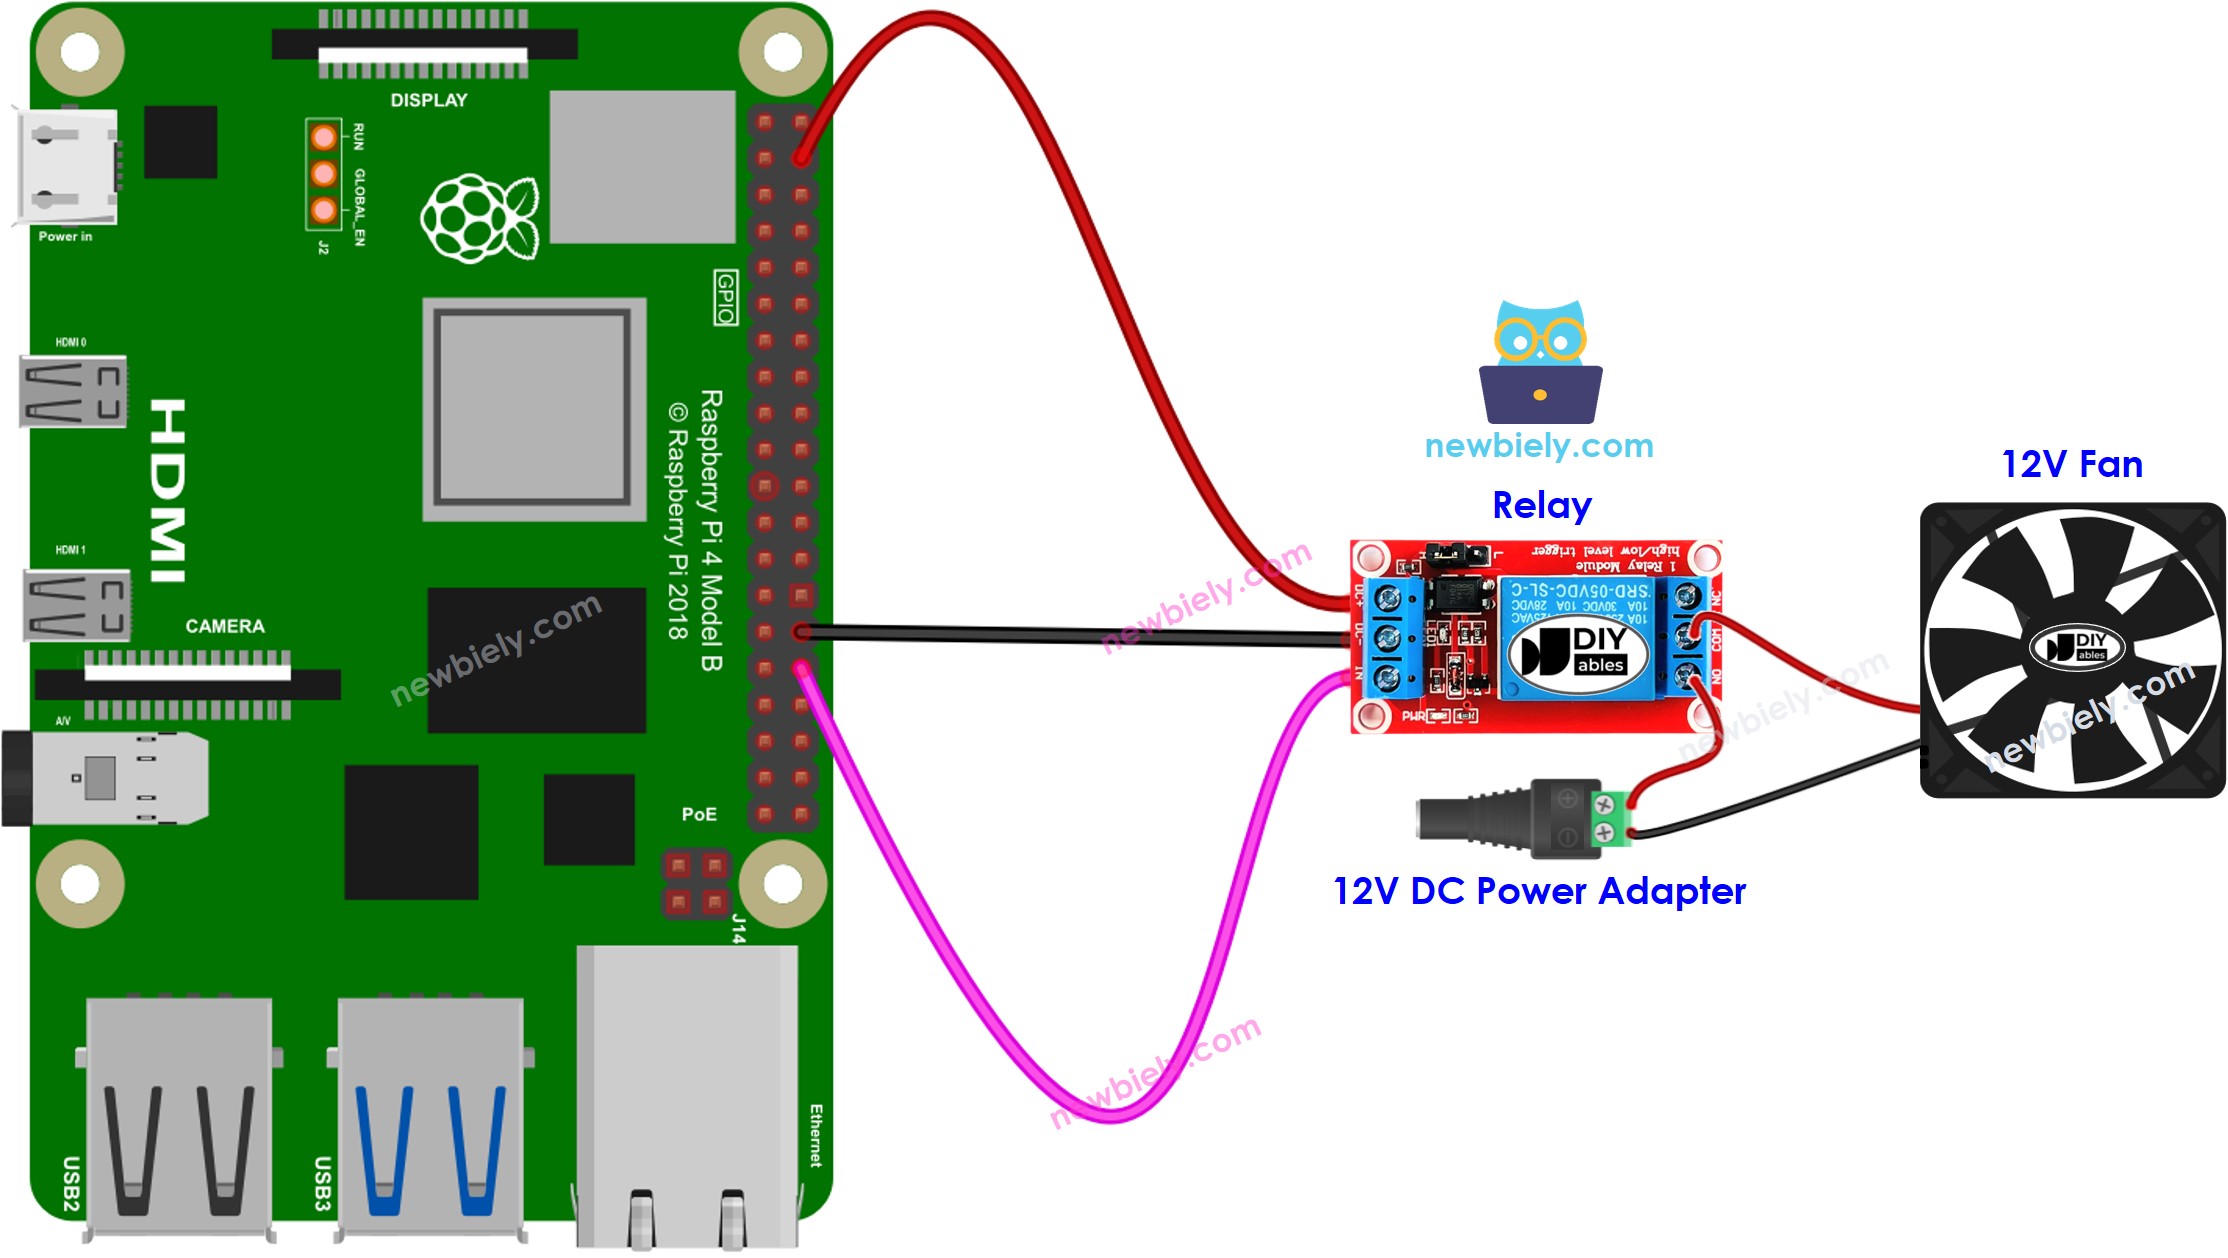 The wiring diagram between Raspberry Pi and Fan